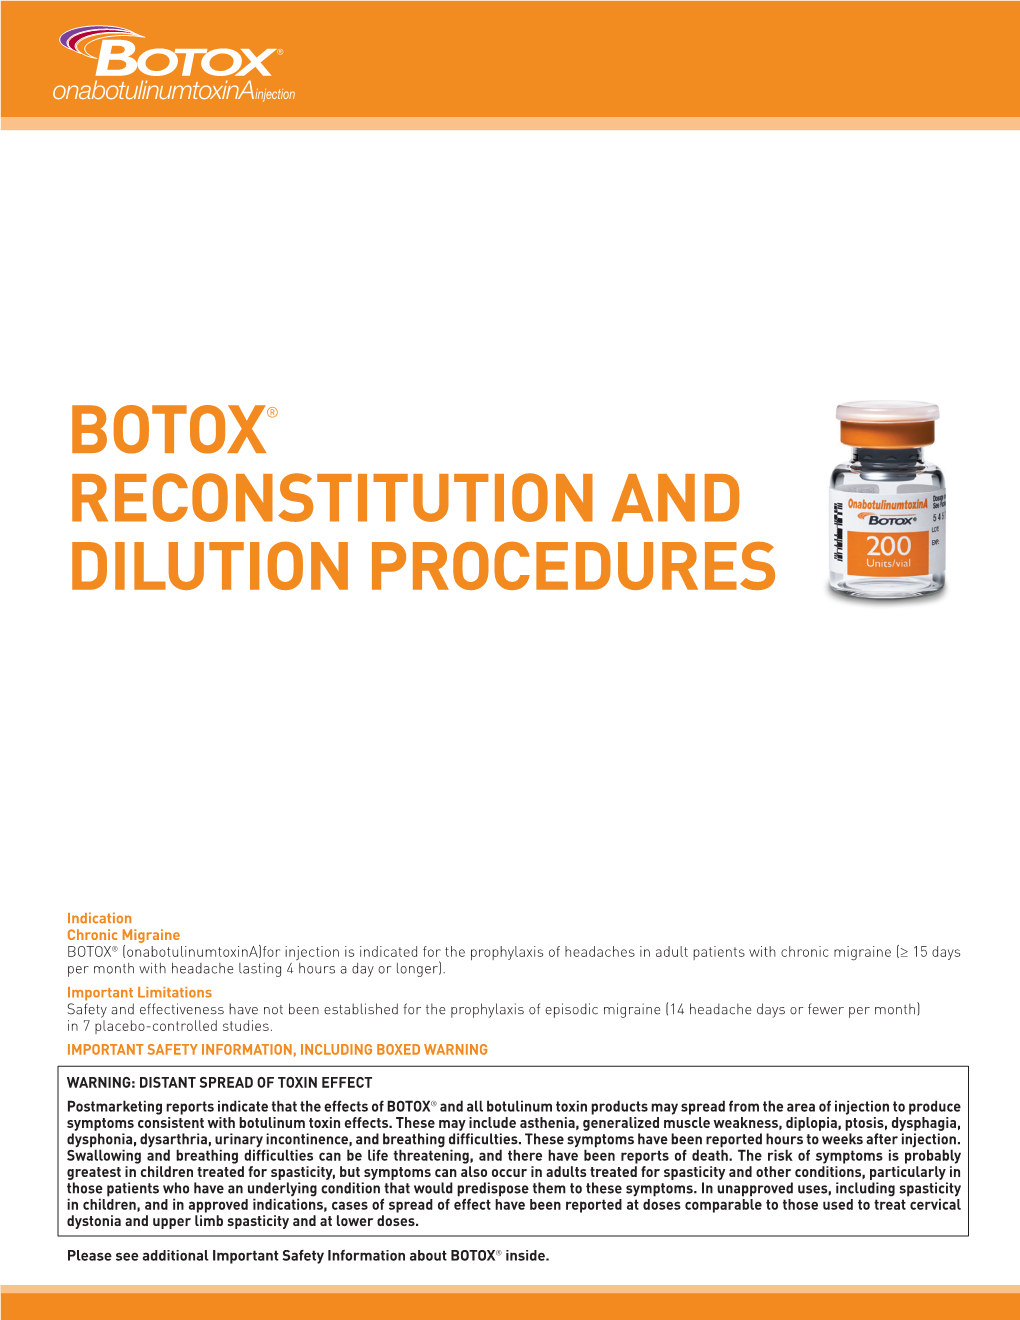 Botox® Reconstitution and Dilution Procedures